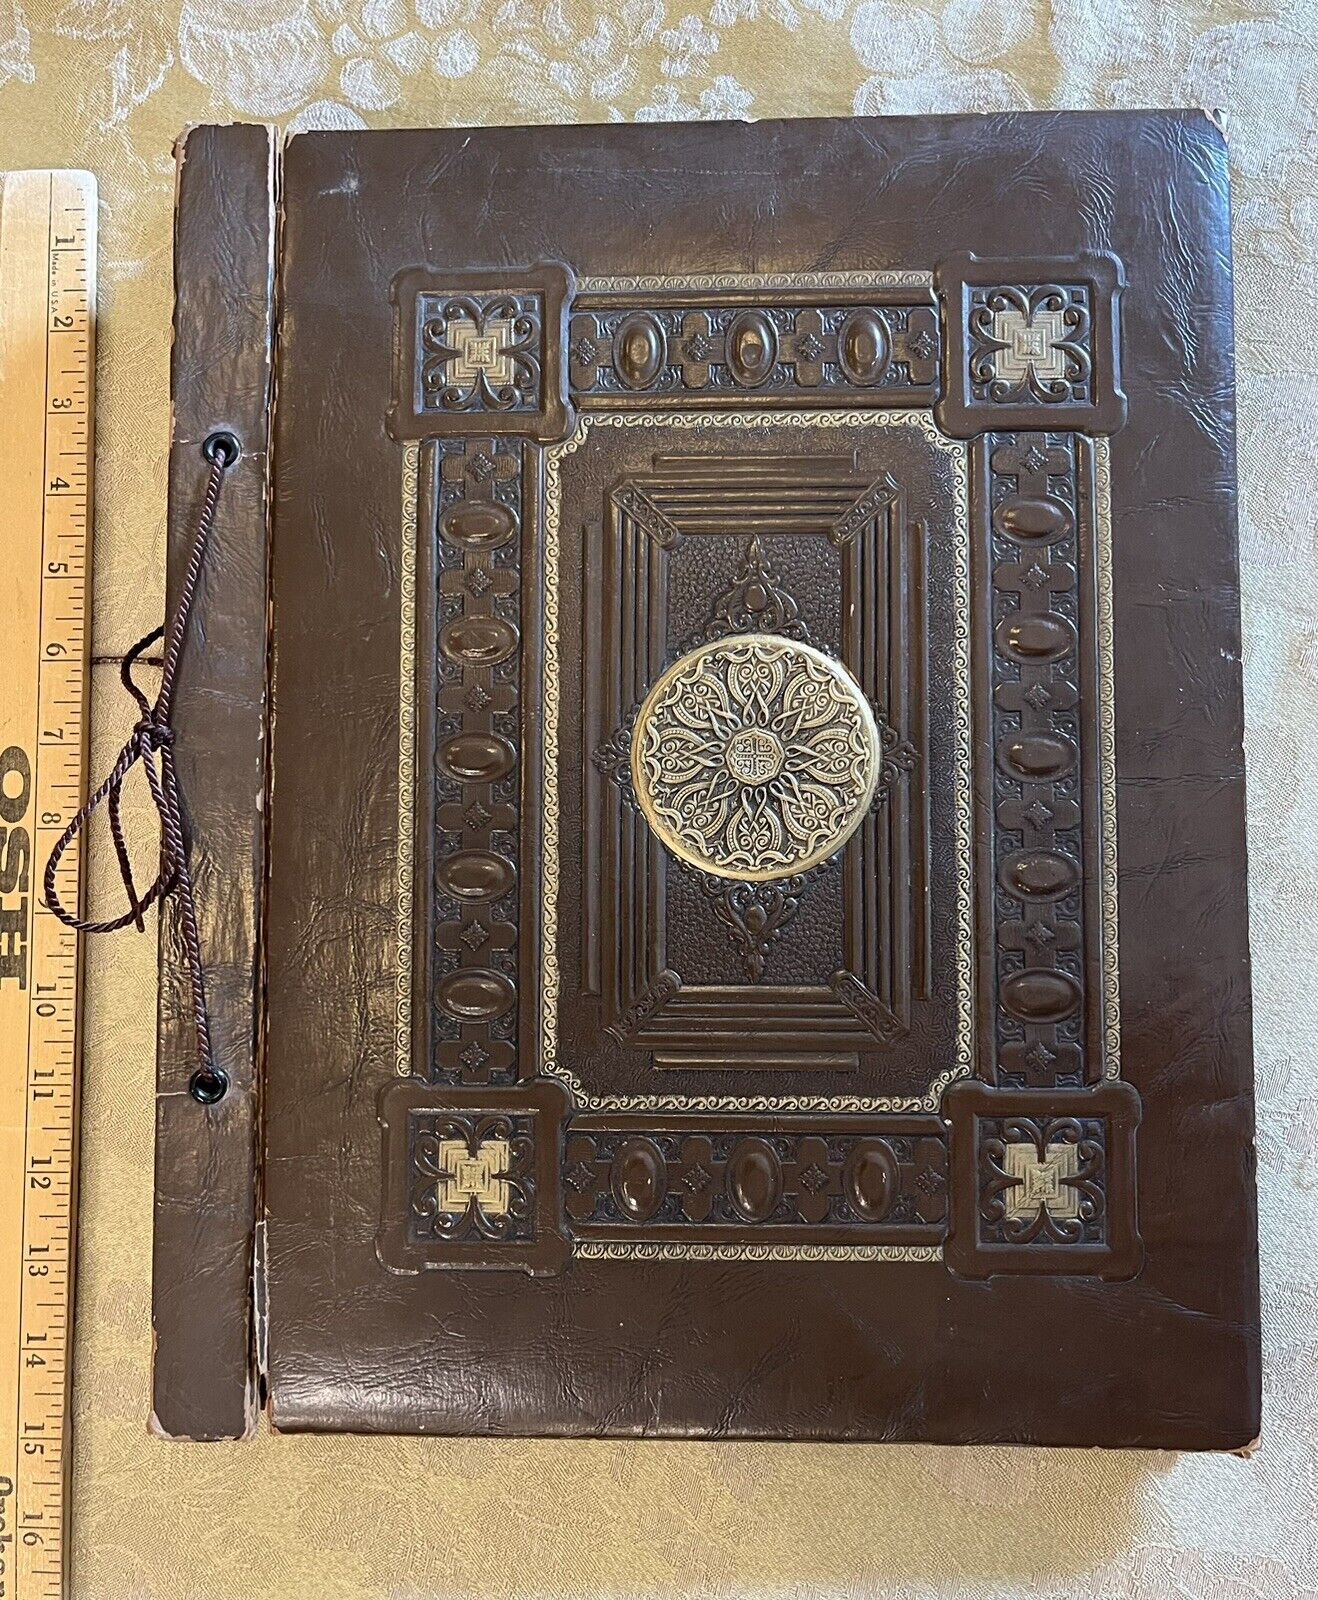 Vintage 1930s-1940s Scrapbook Leather Brown ornate Raised Cover Design +Pages